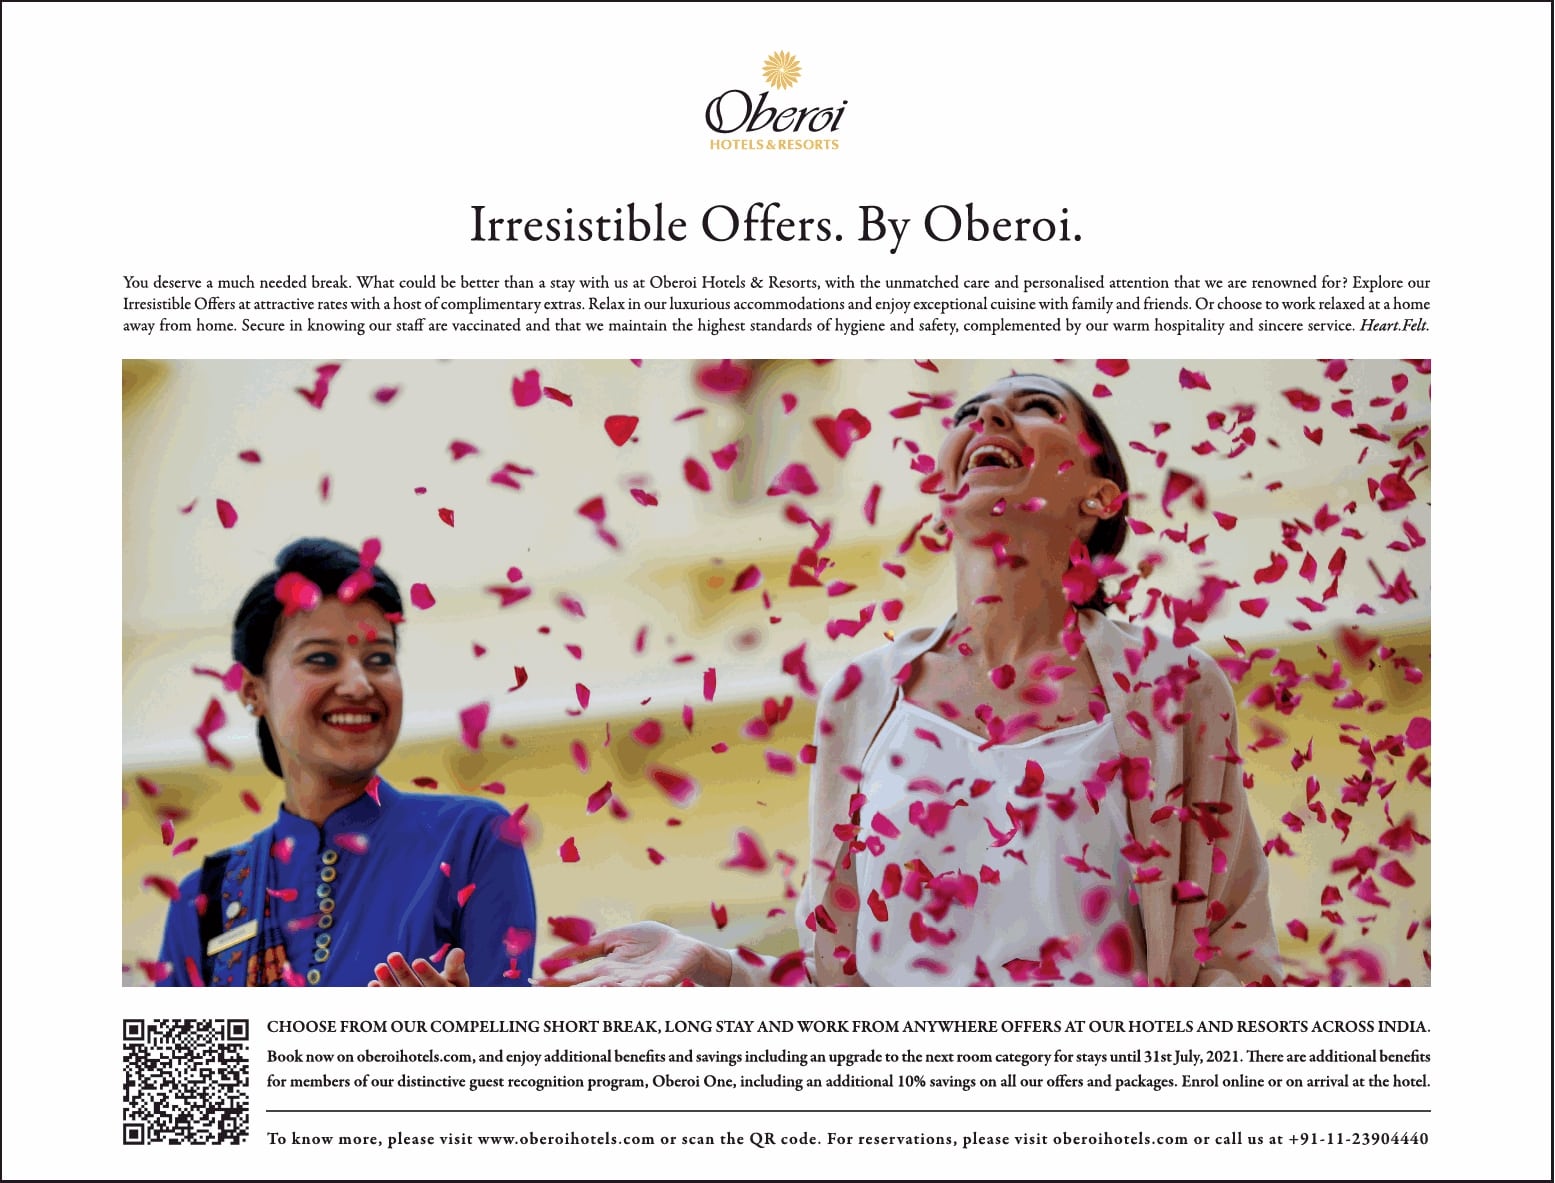 oberoi-hotels-&-resorts-irresistible-offers-choose-from-our-compelling-short-break-ad-toi-mumbai-30-6-2021